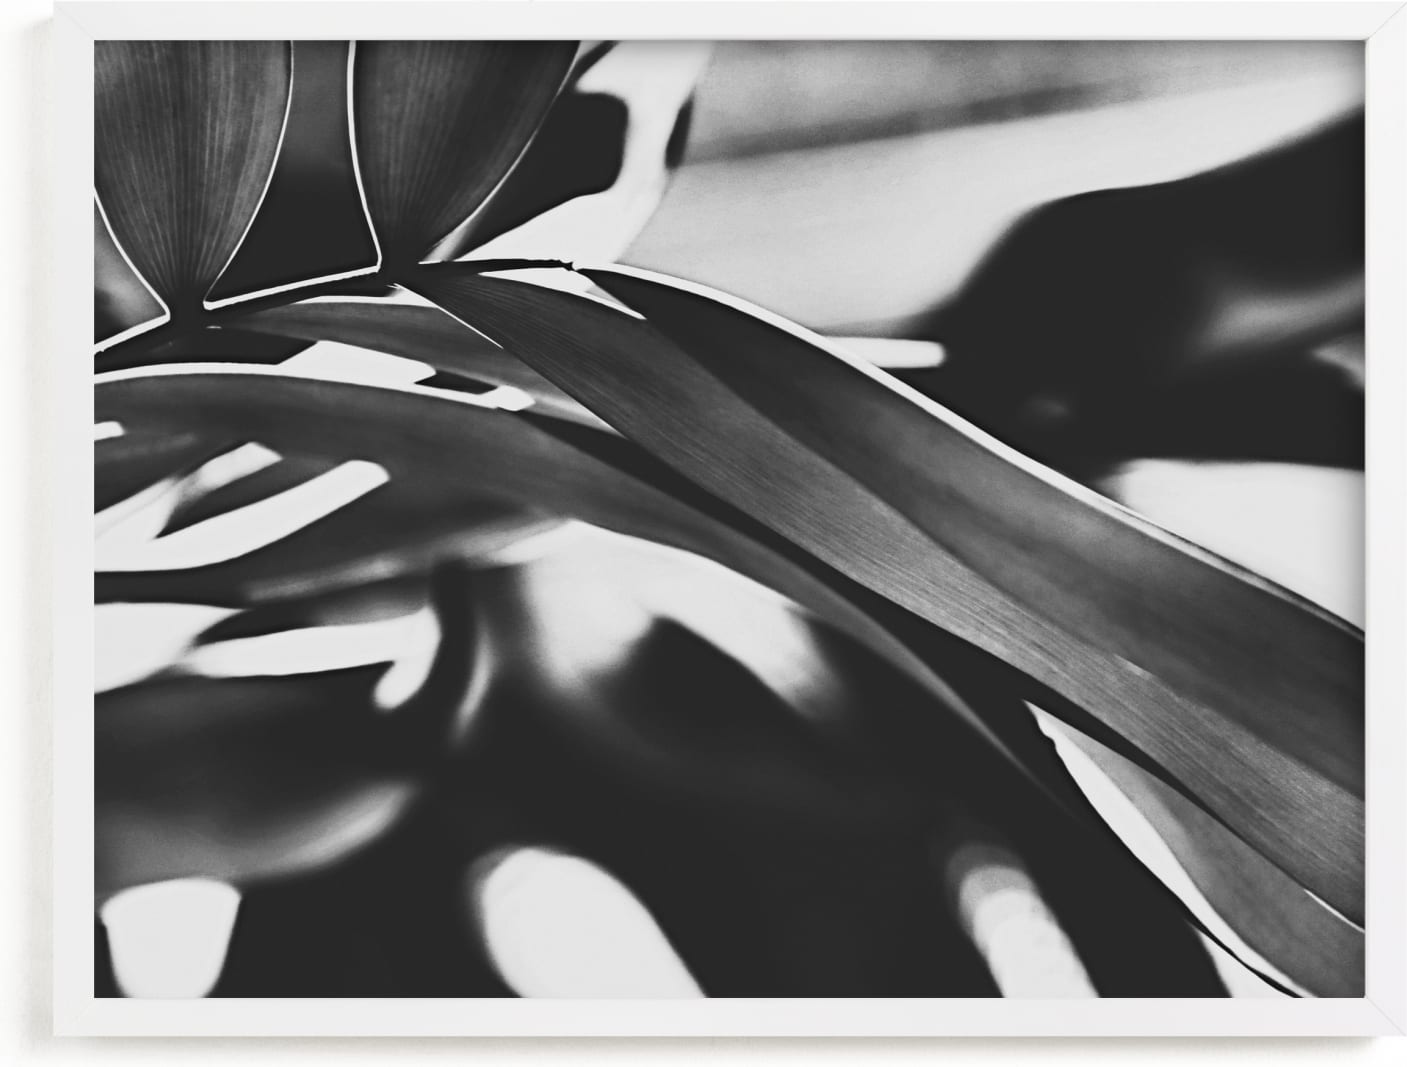 This is a black and white art by Amy Chapman Braun called GLOWING BOTANICAL II.